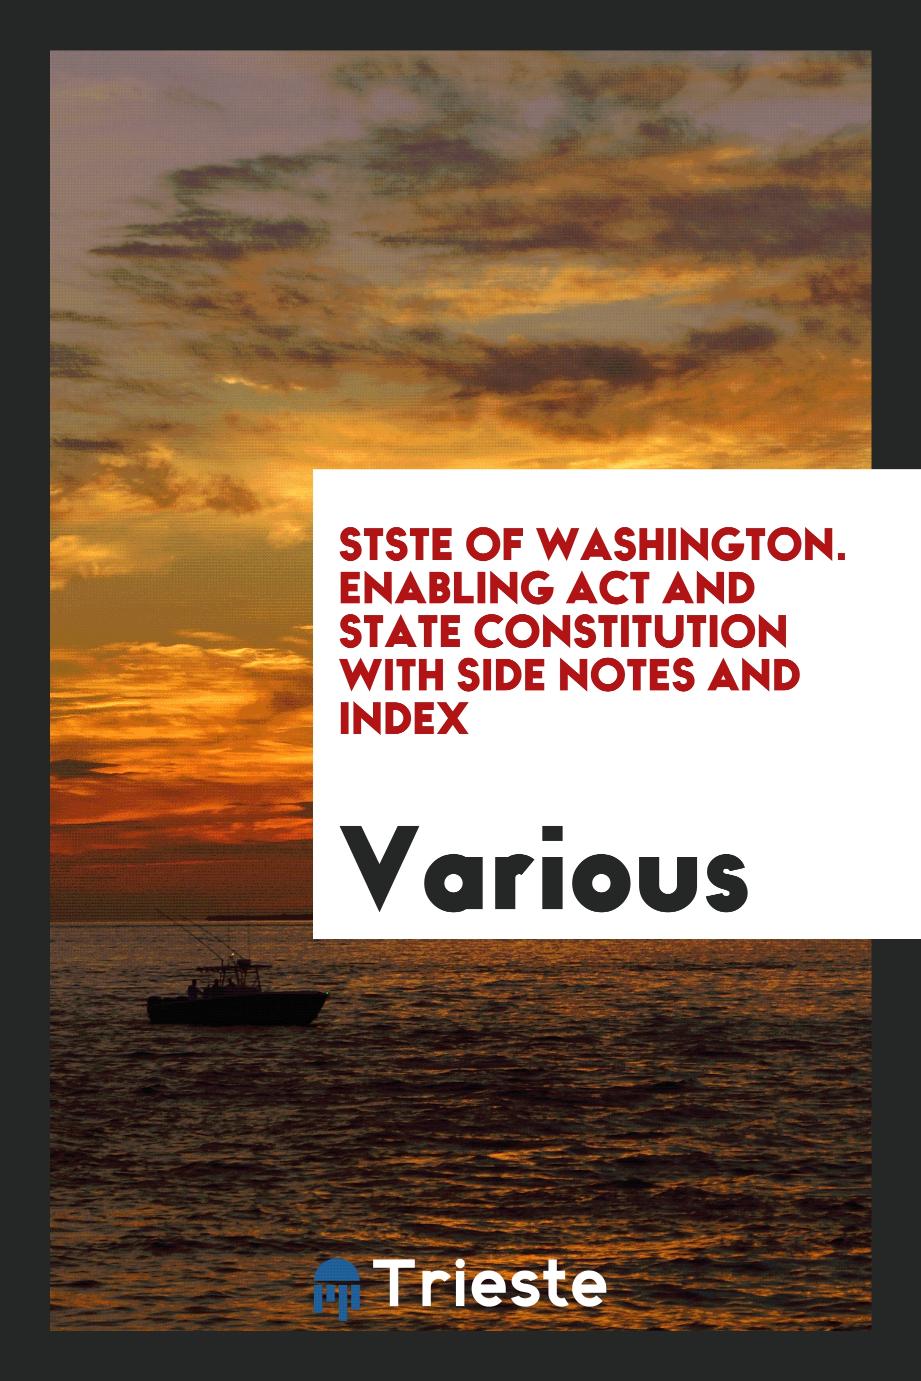 Stste of Washington. Enabling Act and State Constitution with Side Notes and Index